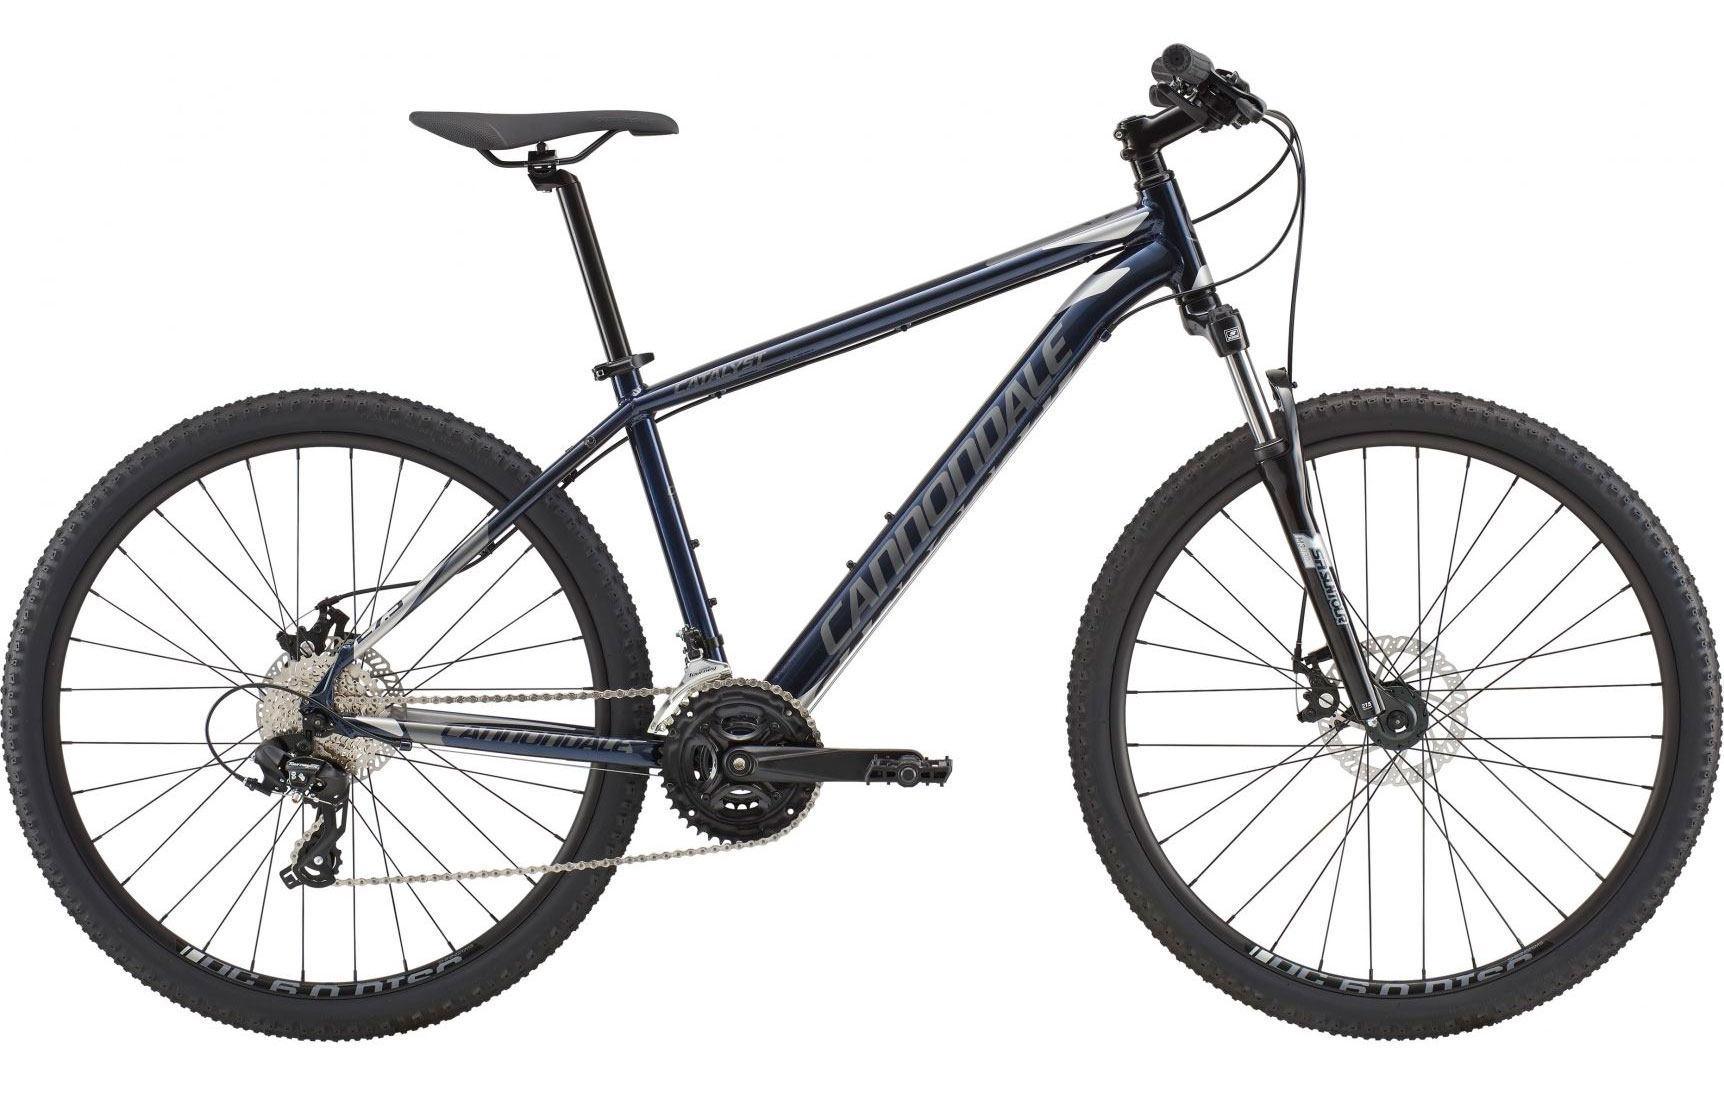 Велосипед 27,5" Cannondale CATALYST 3 рама - L 2018 MDN